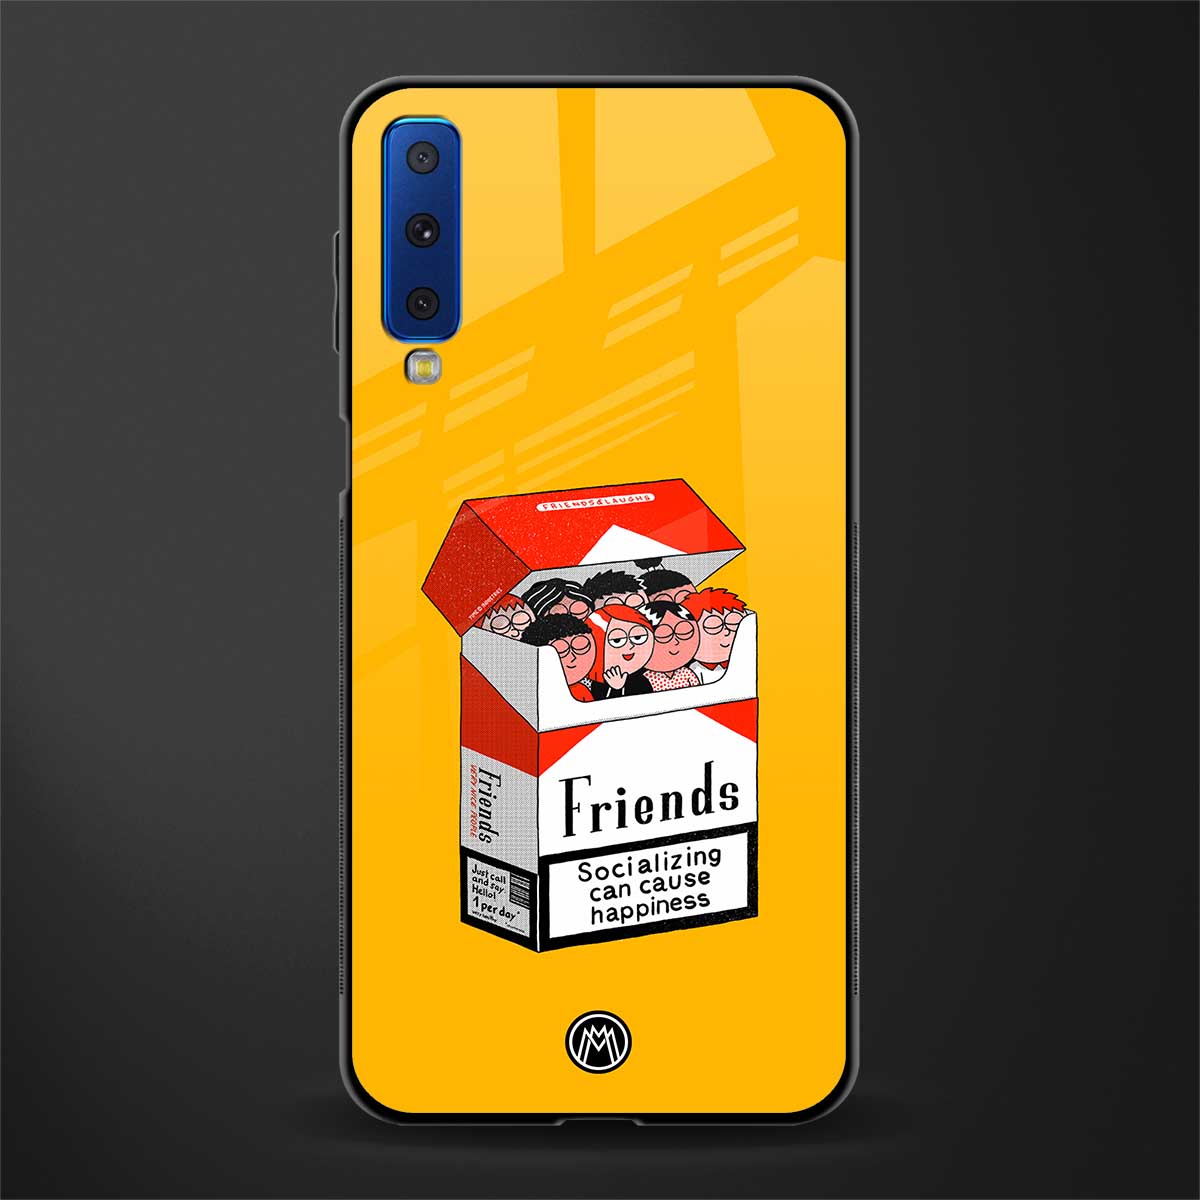 socializing can cause happiness glass case for samsung galaxy a7 2018 image